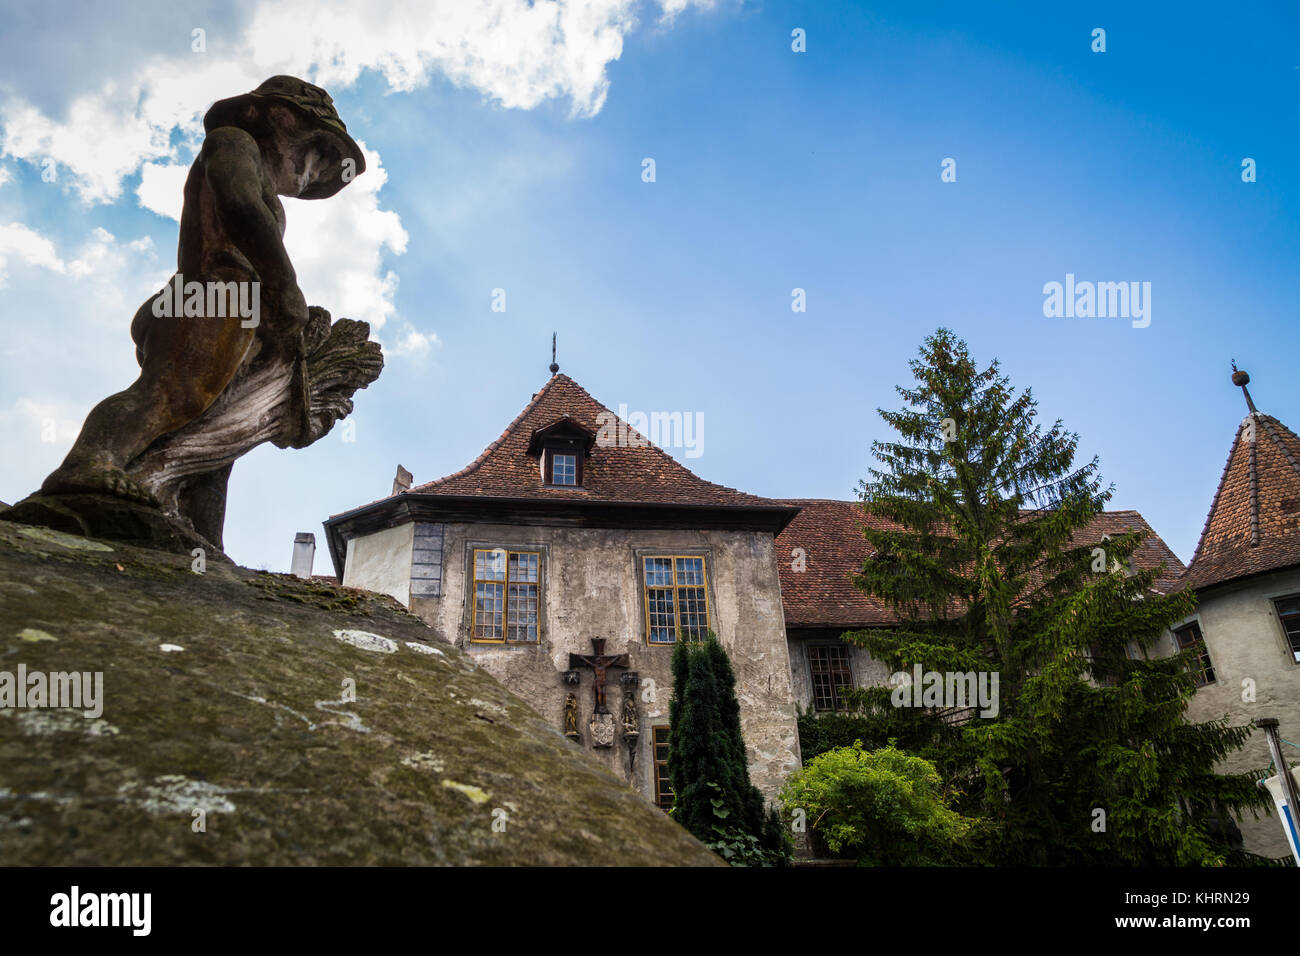 Castle in Meersburg, a small statue in the foreground. Stock Photo